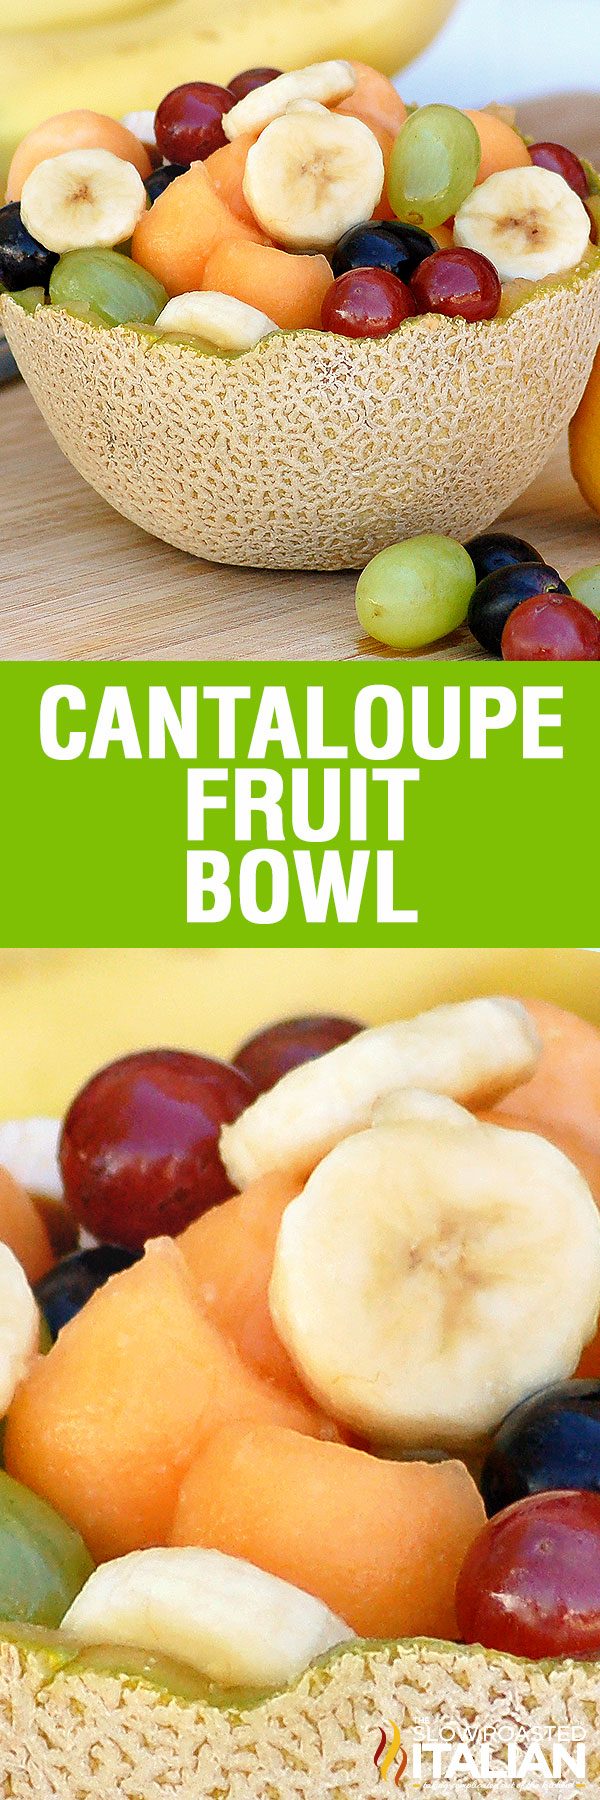 Super Simple Cantaloupe Fruit Bowl is loaded with your favorite fruit and a simple dressing to perk up your taste buds. This fresh cantaloupe salad recipe is perfect for parties and easy enough for lunch at home.